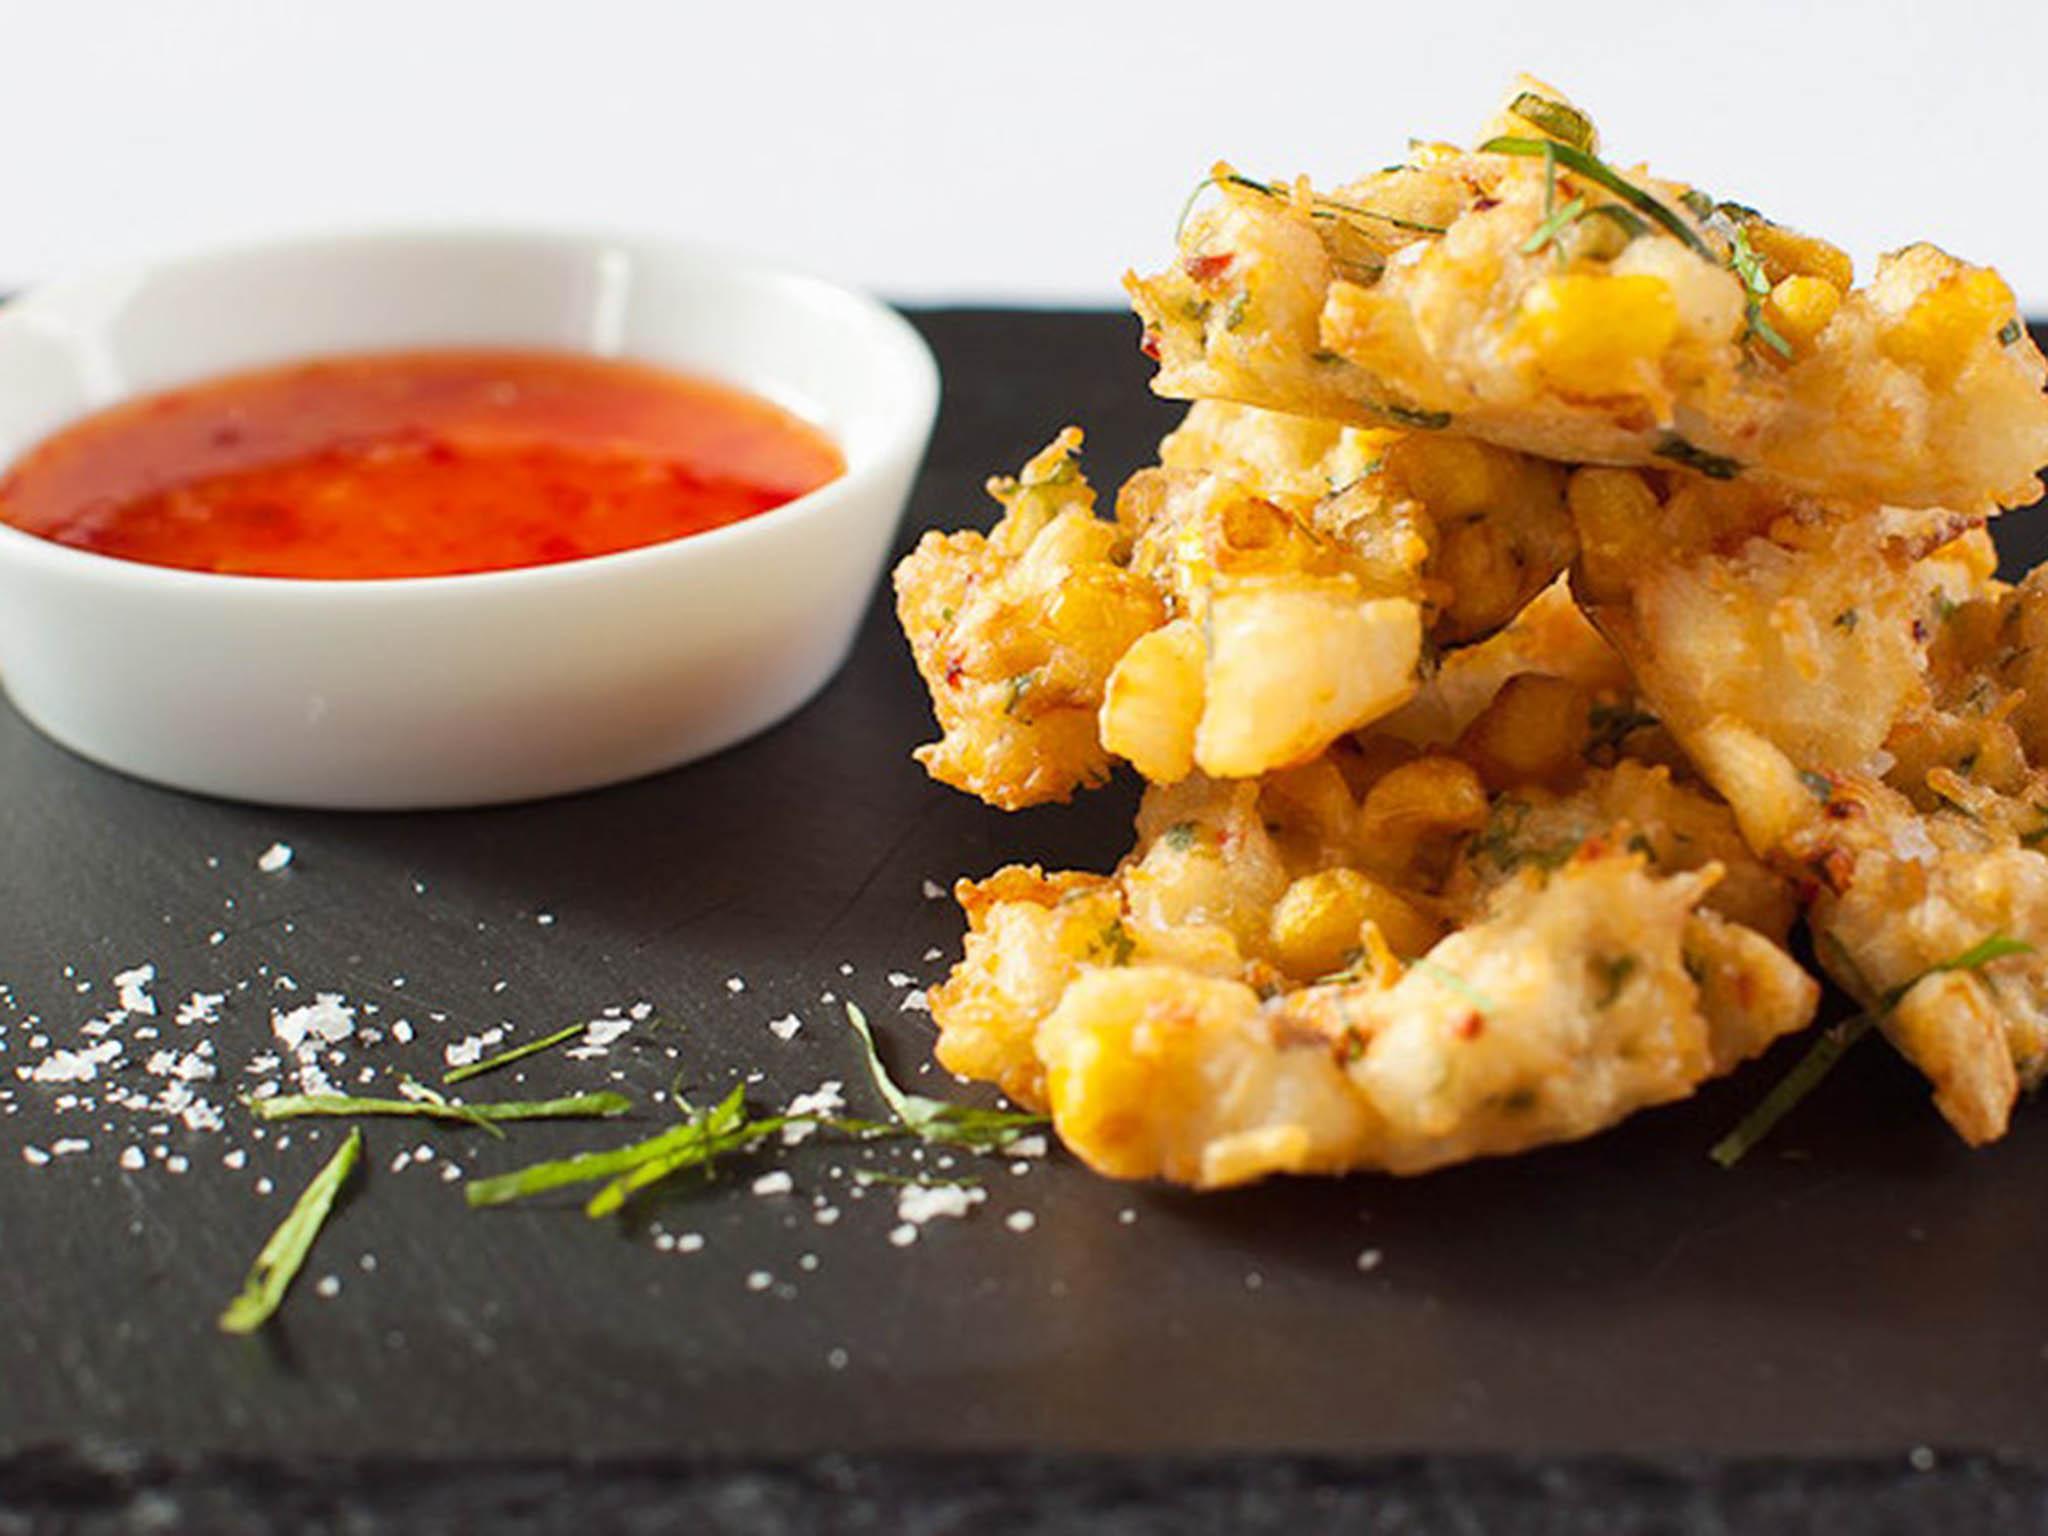 These Thai sweetcorn fritters are given a touch of spice with corriander